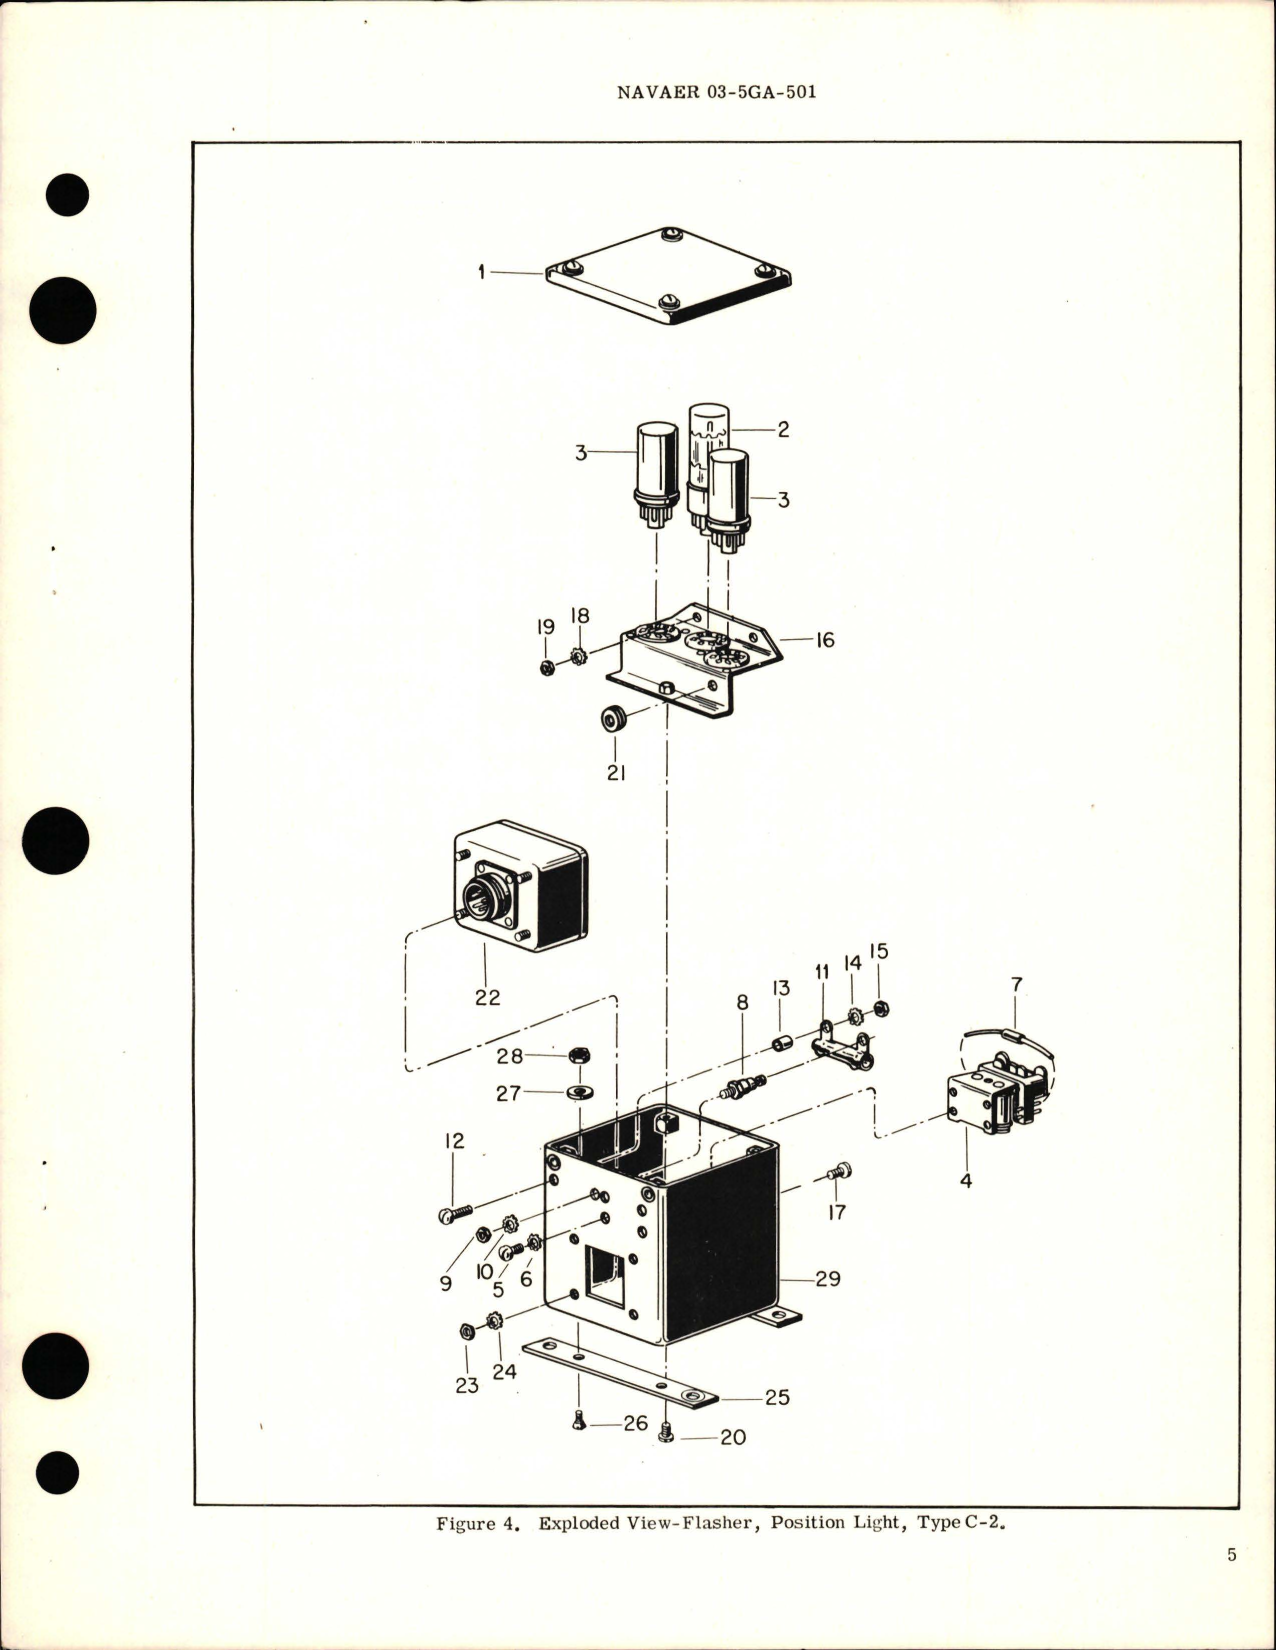 Sample page 5 from AirCorps Library document: Overhaul Instructions with Parts Breakdown for Position Light Flasher - Type C-2, Part 1055-1